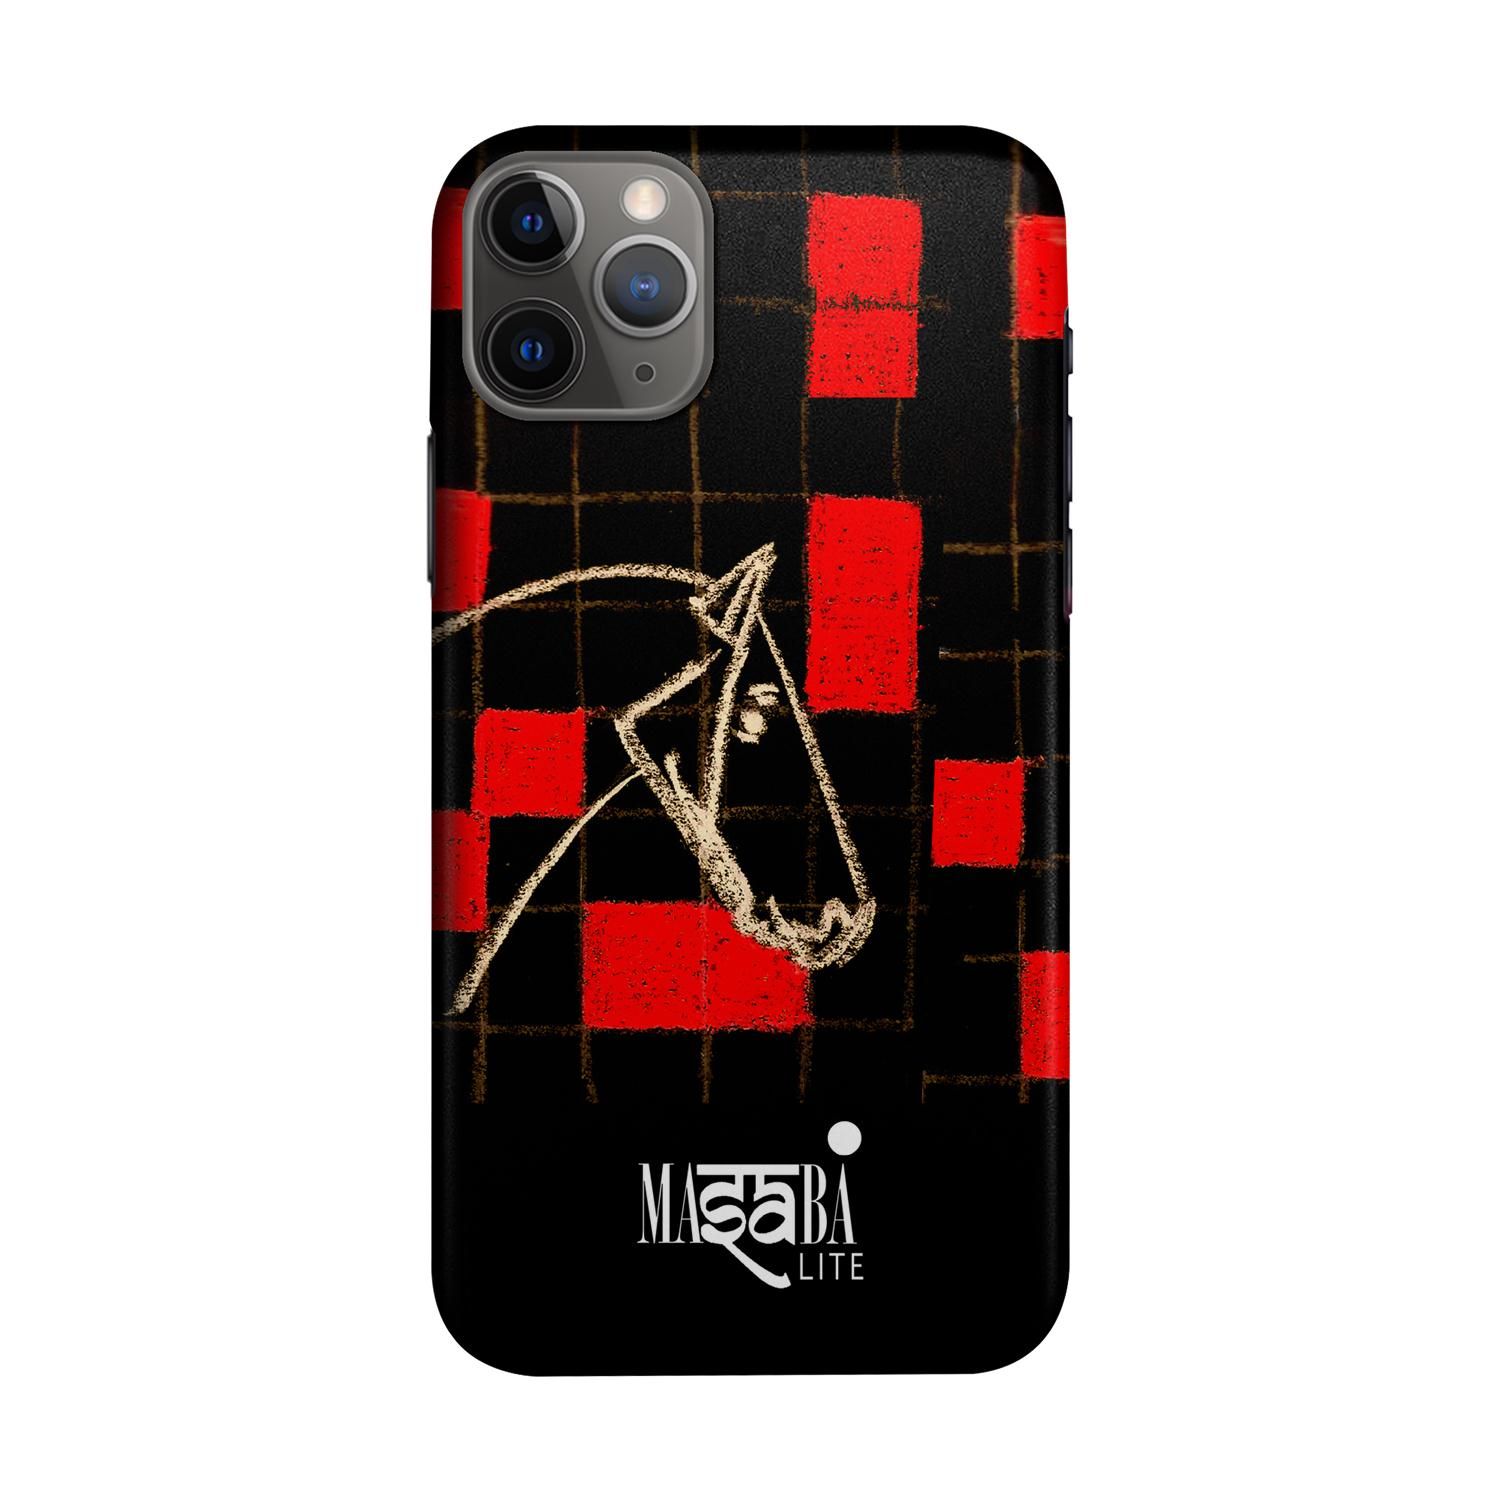 Buy Masaba Red Checkered Horse - Sleek Phone Case for iPhone 11 Pro Online